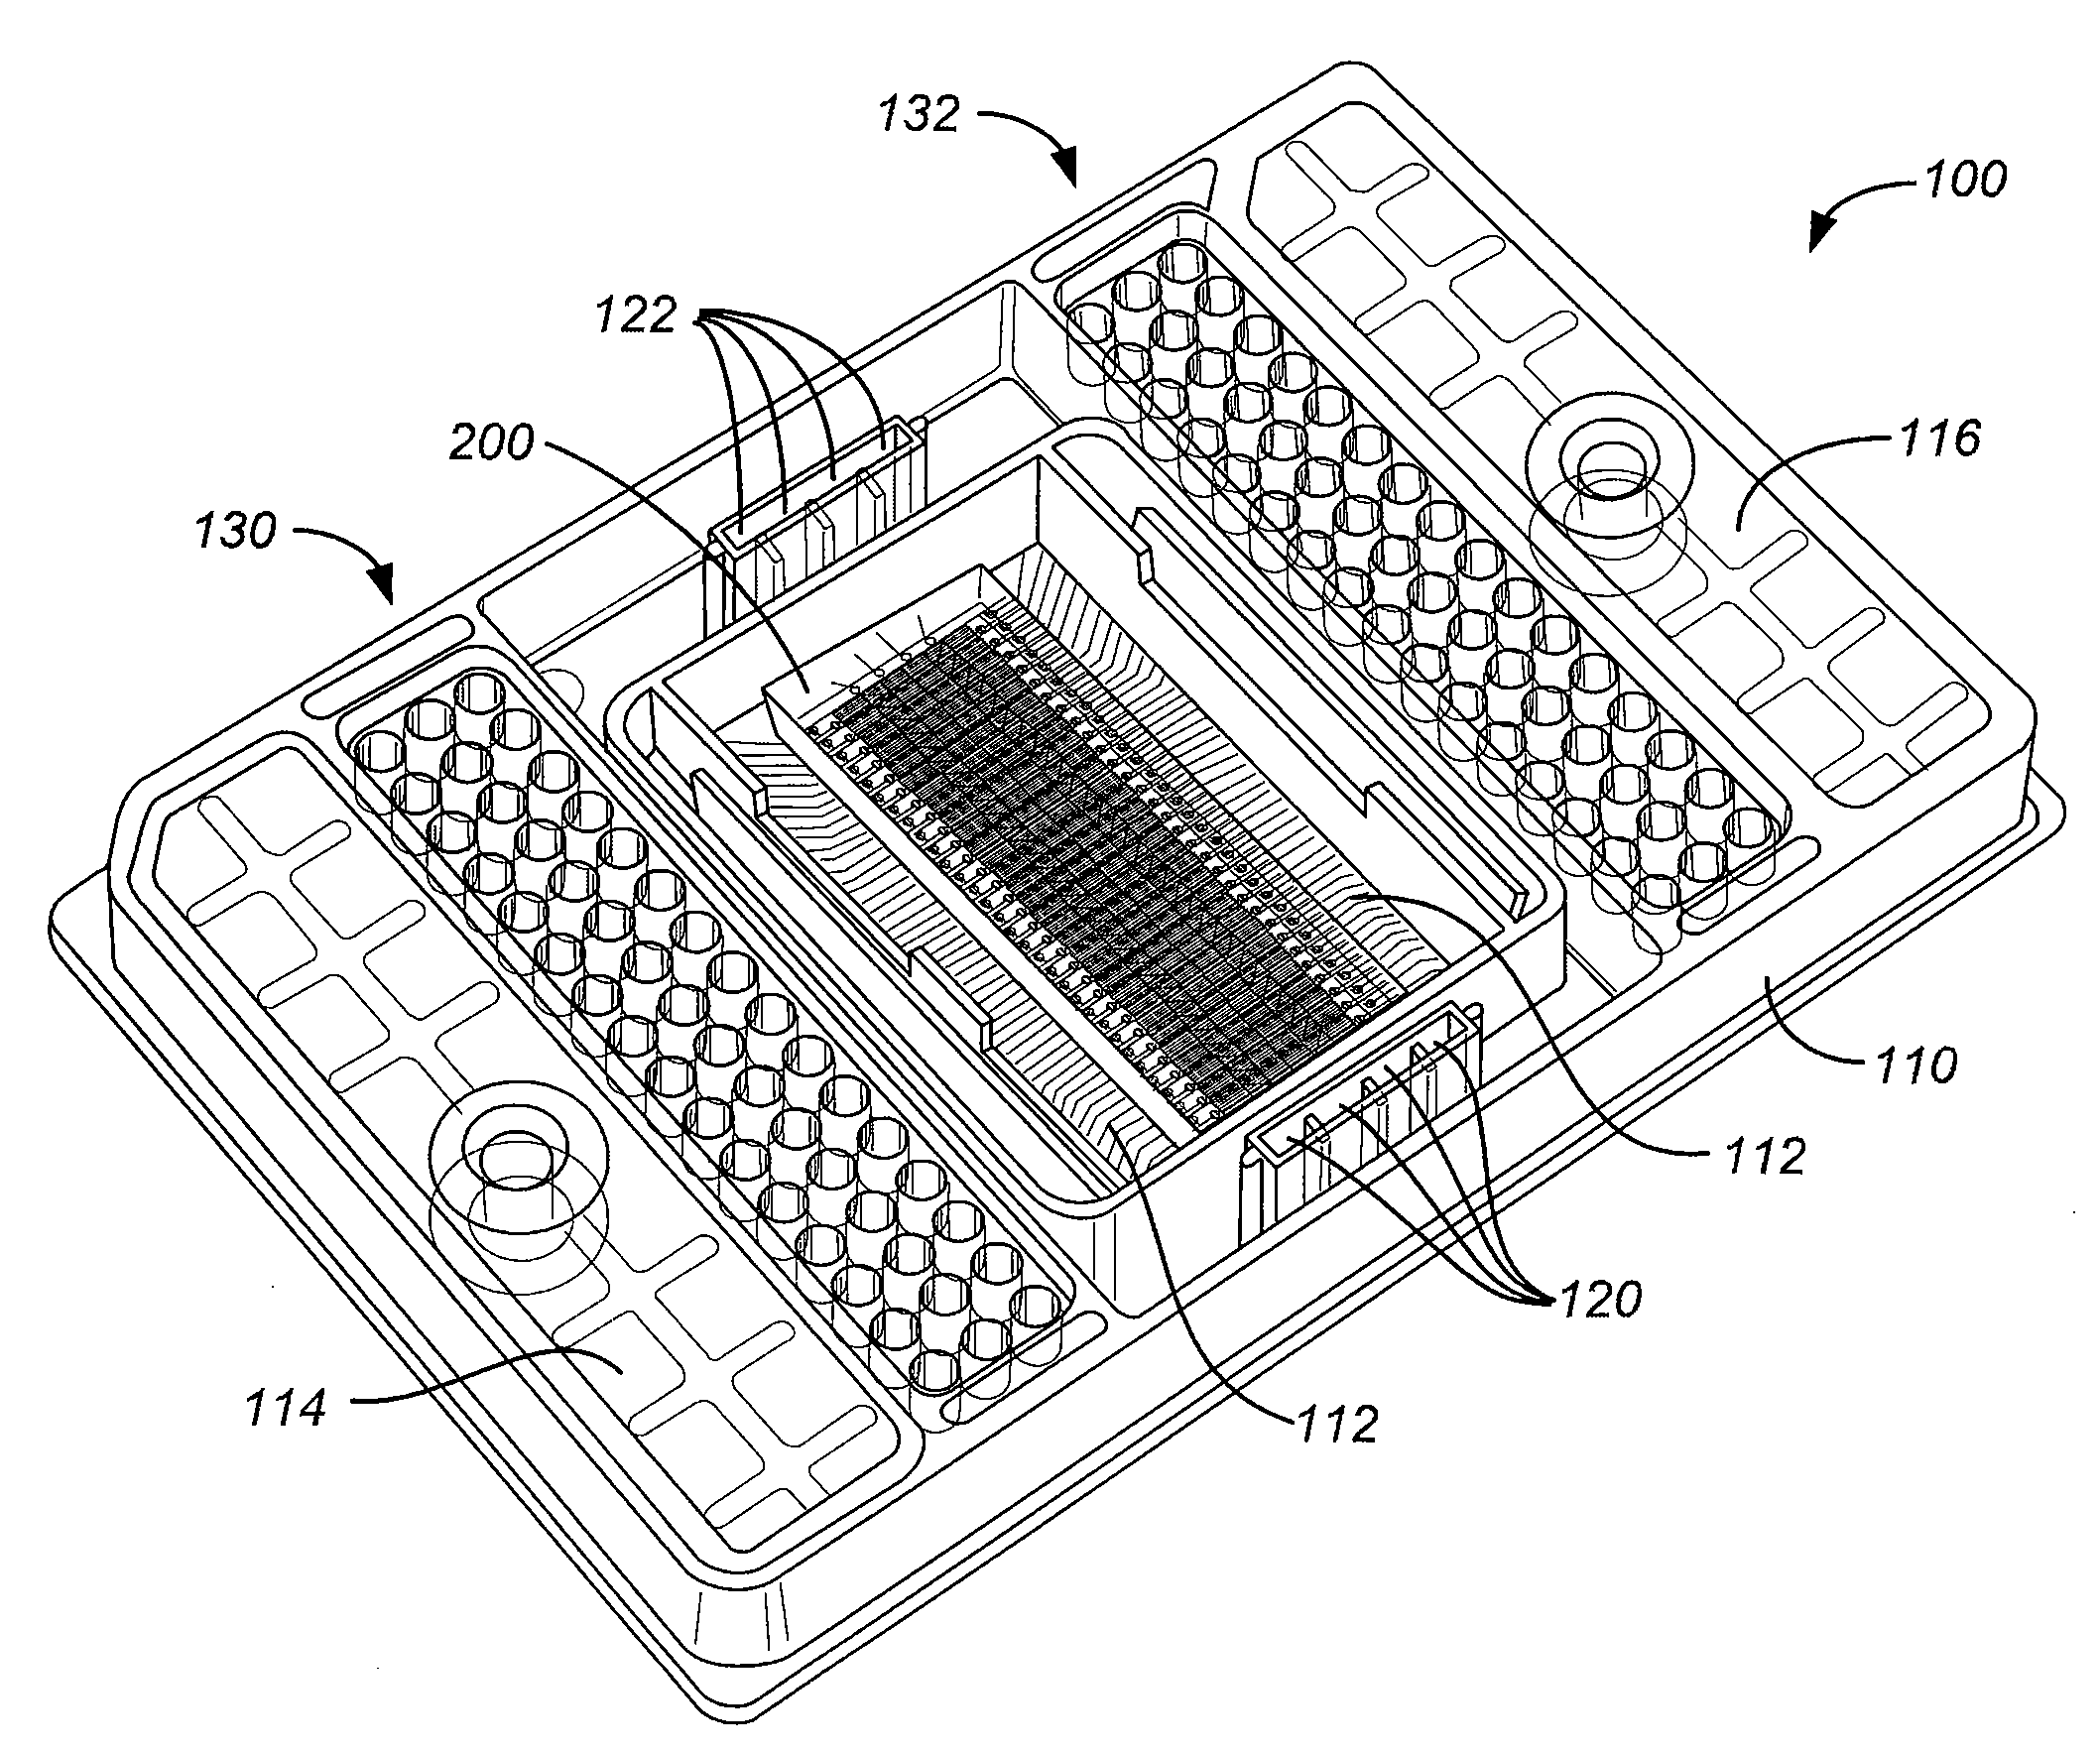 Method and system for crystallization and x-ray diffraction screening